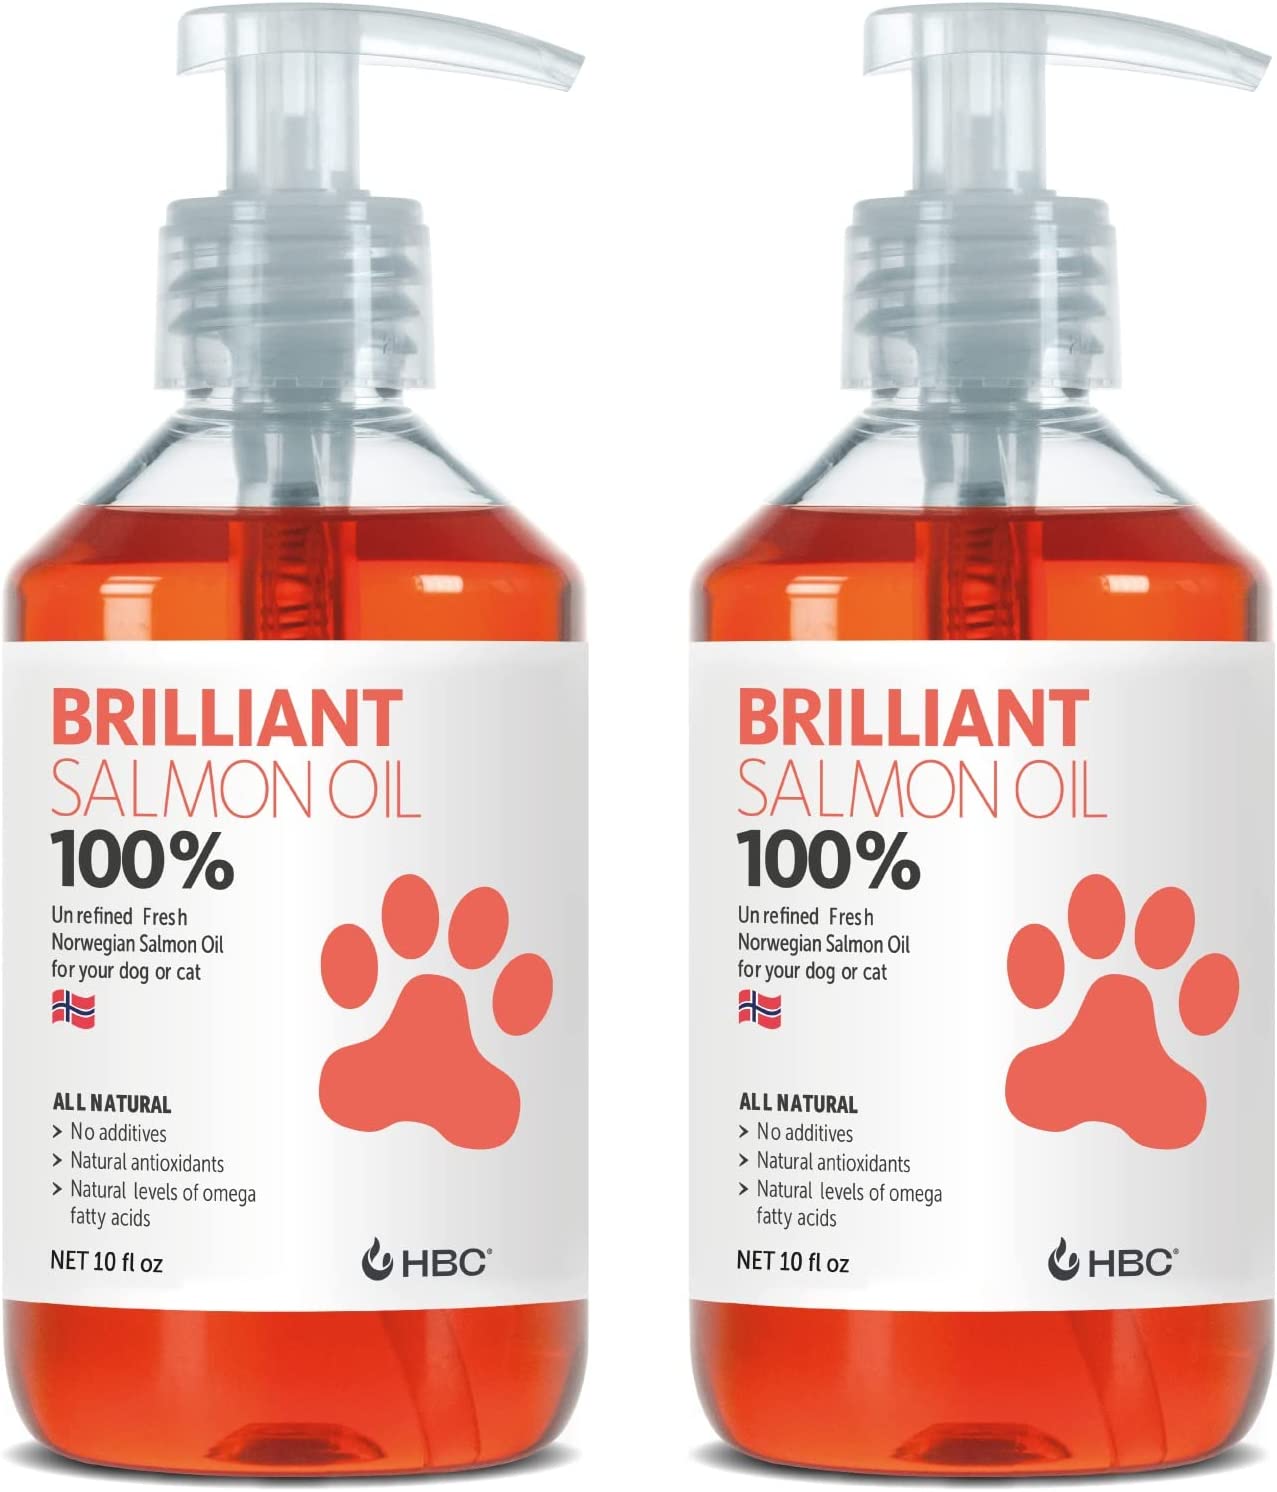 Brilliant Salmon Oil for Dogs, Cats & Puppies, Pure Omega 3 Fish Oil Liquid Food Supplement with DHA & EPA Fatty Acids, by Hofseth BioCare (10 Ounce)(Pack of 2)